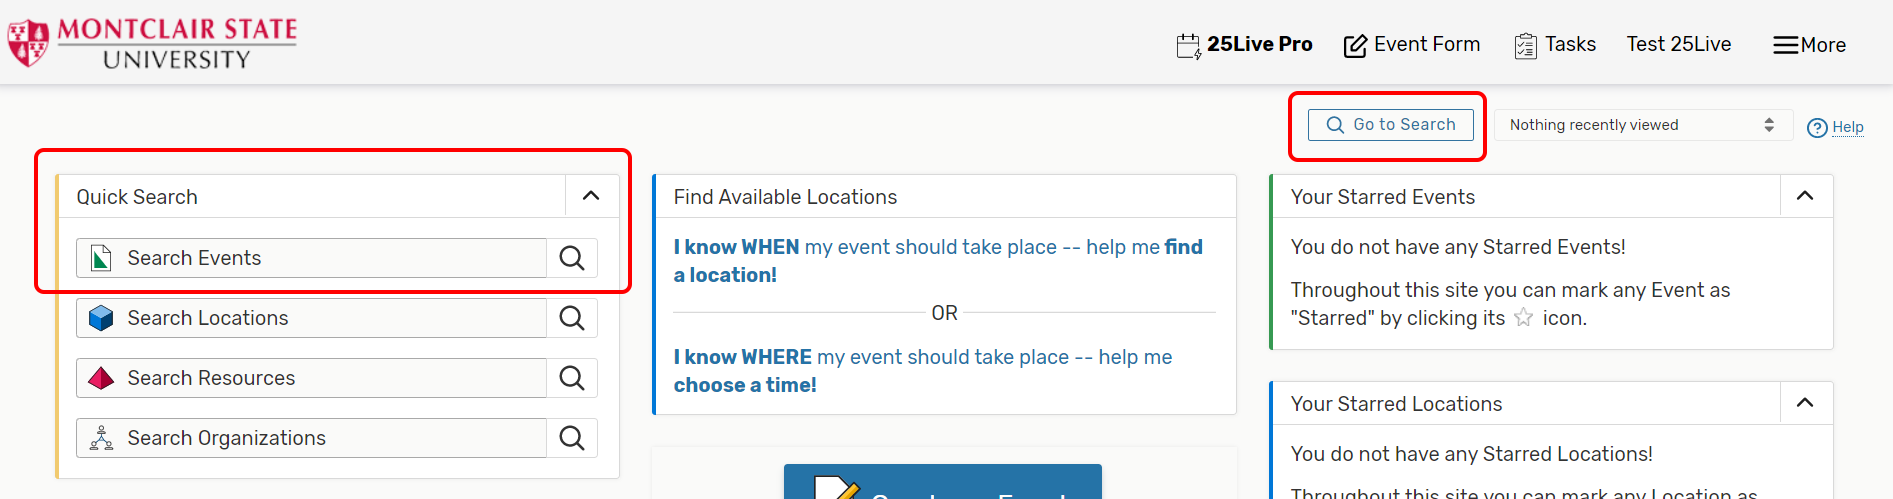 Search events text field in 25Live